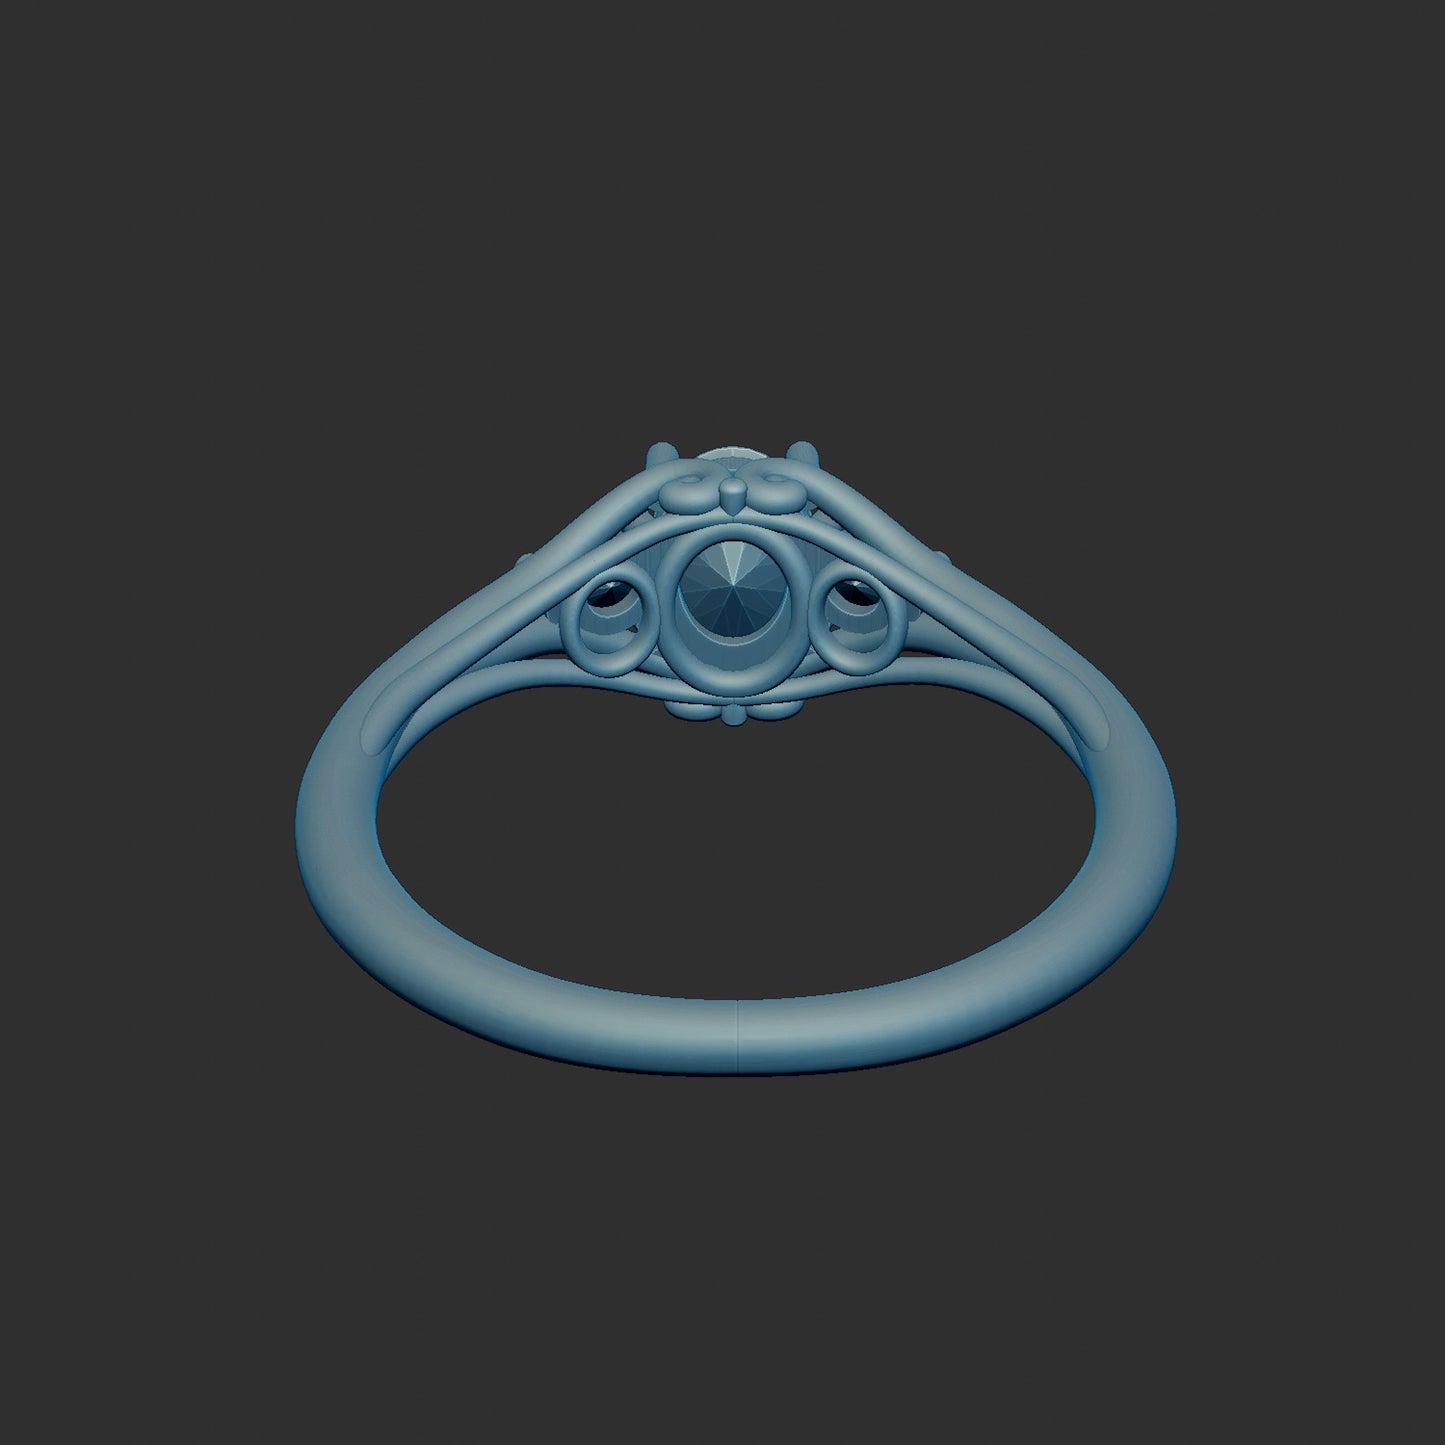 Elegant Past Present and Future Scroll Ring 3d Model